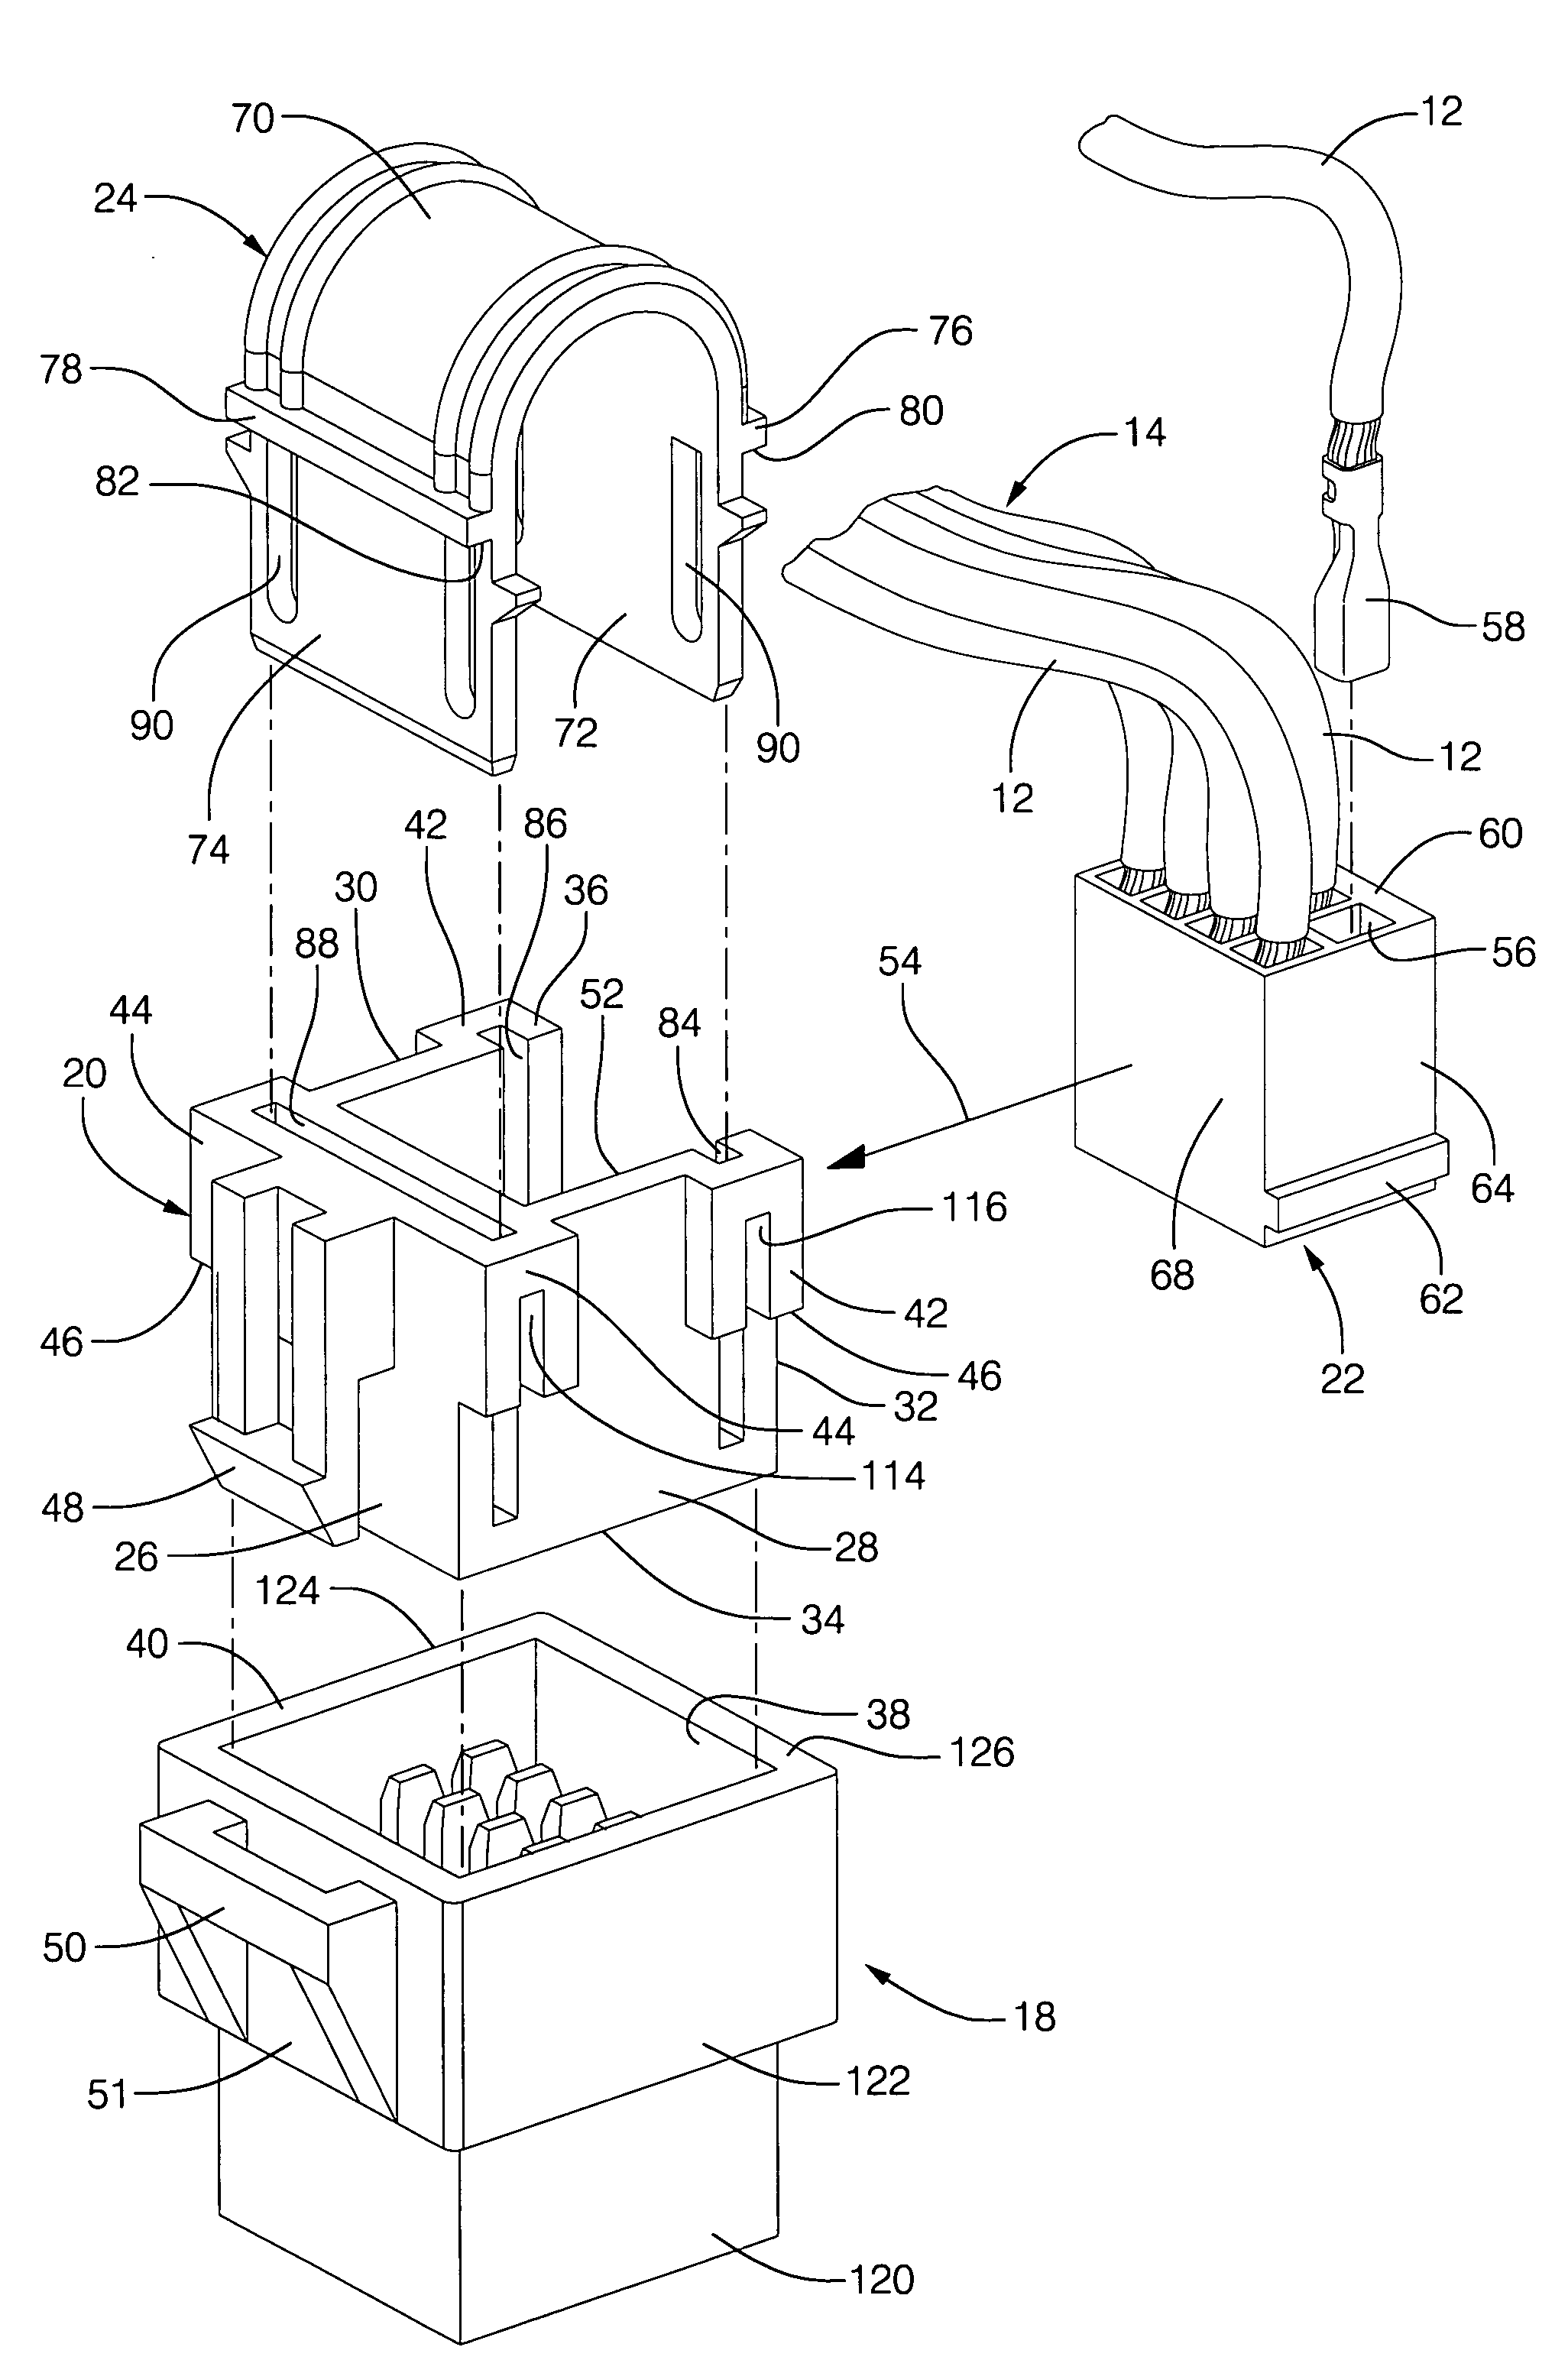 Electrical connector with integrated terminal position assurance and wire cover